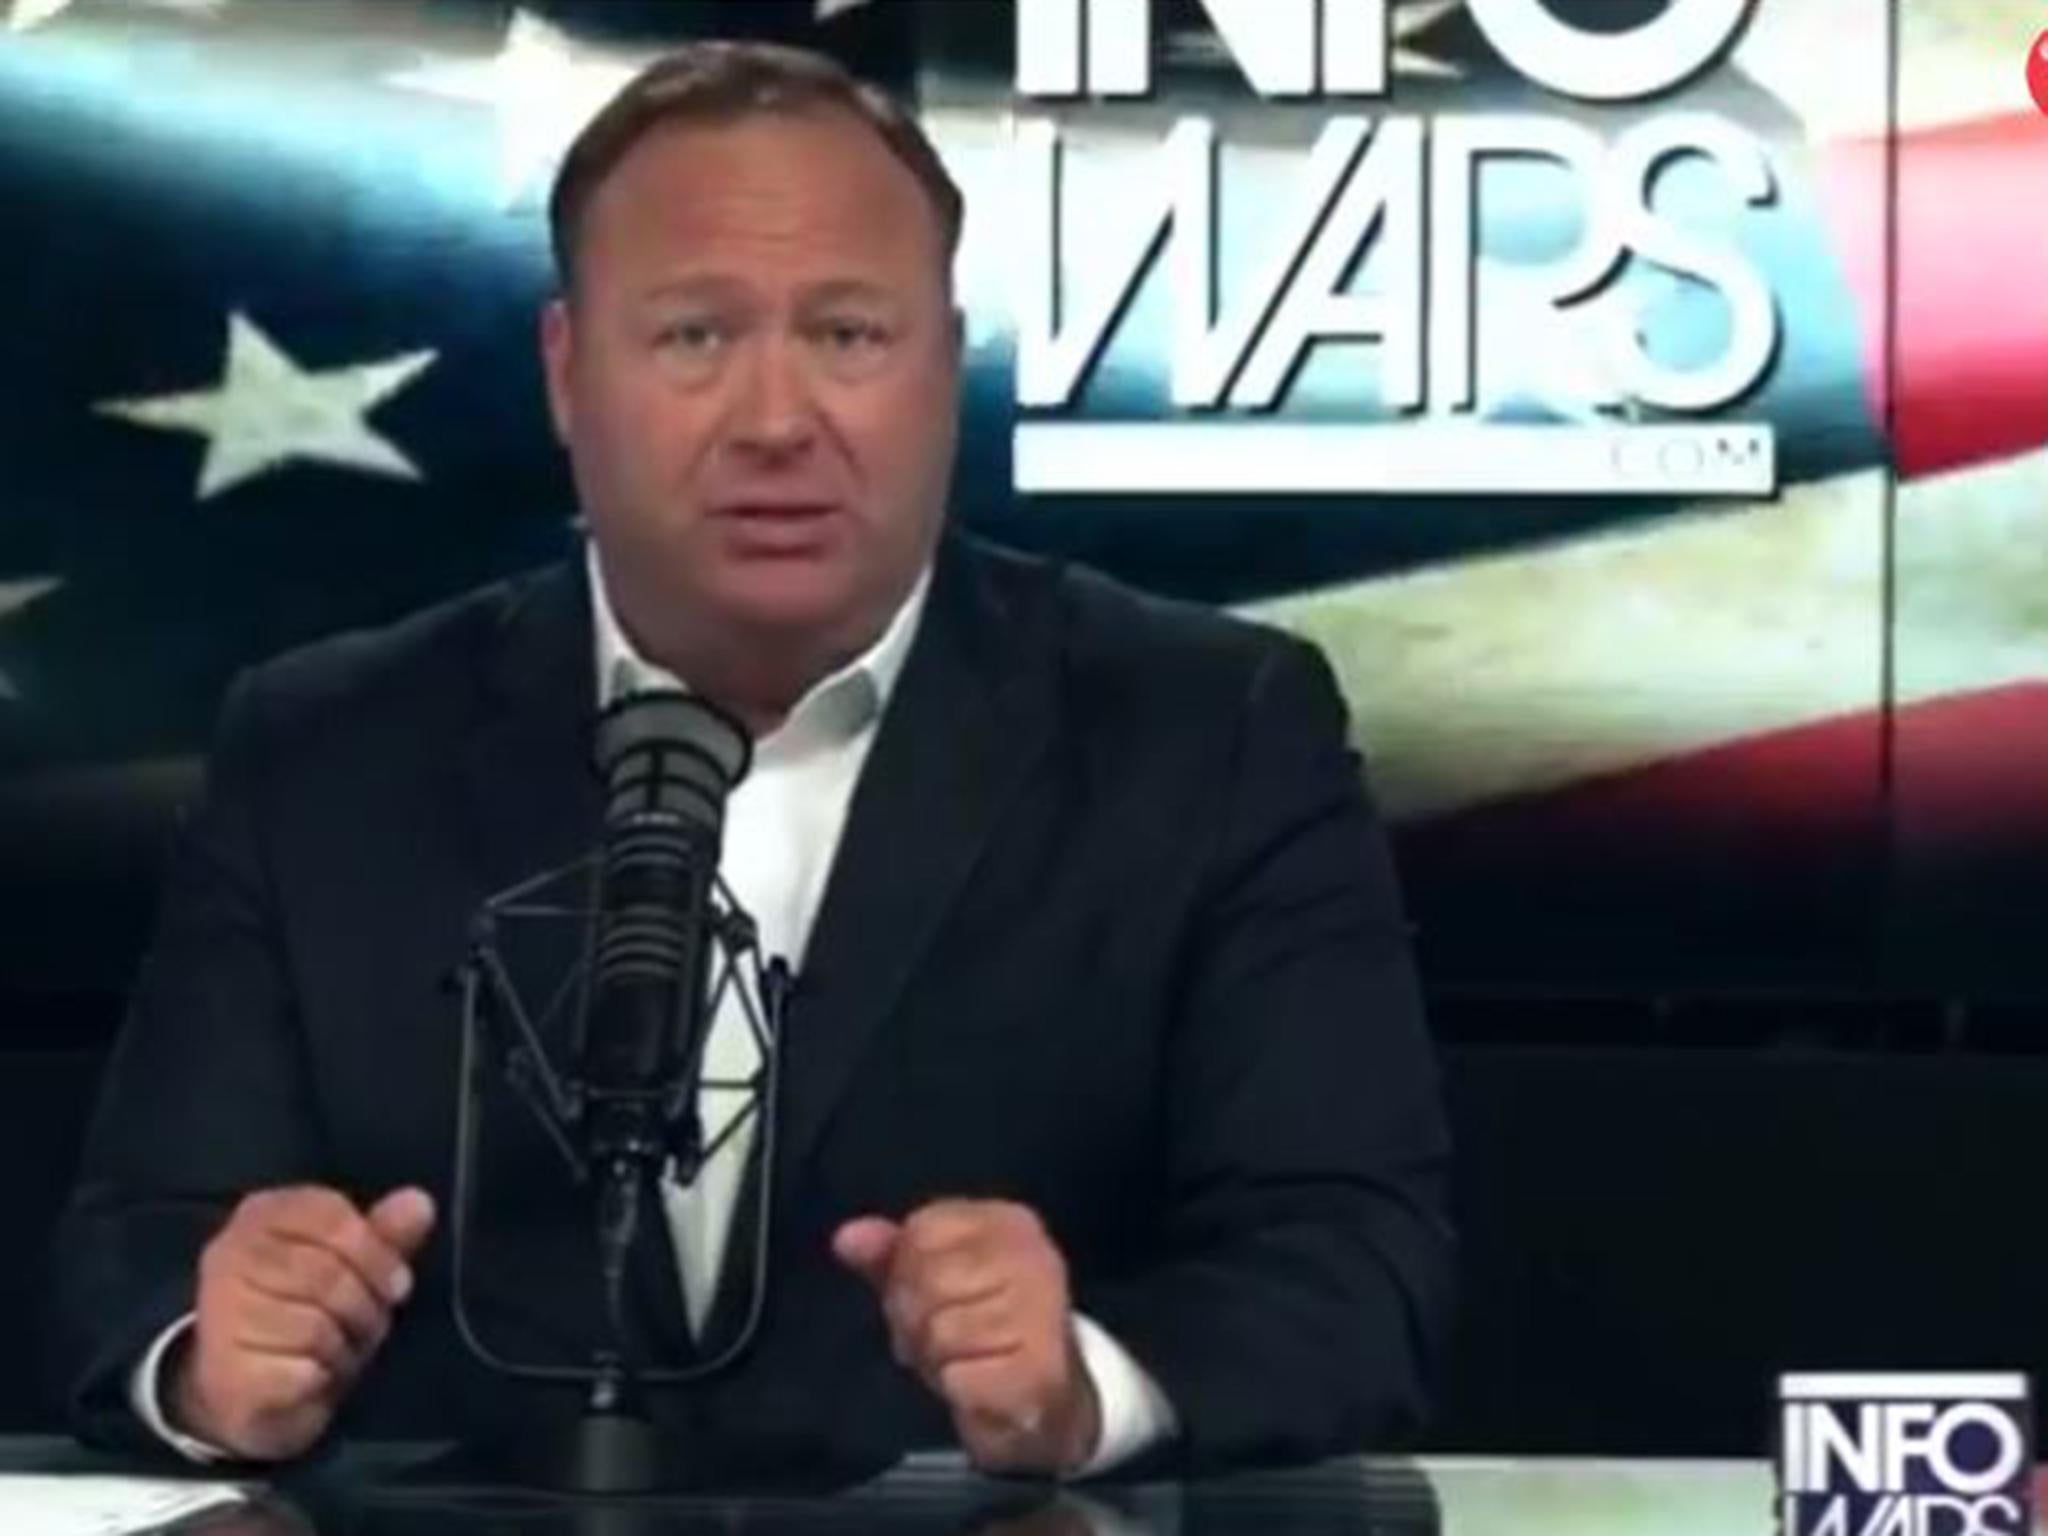 The video posted by Alex Jones' site was removed by YouTube for breaching its policies on bullying and harassment